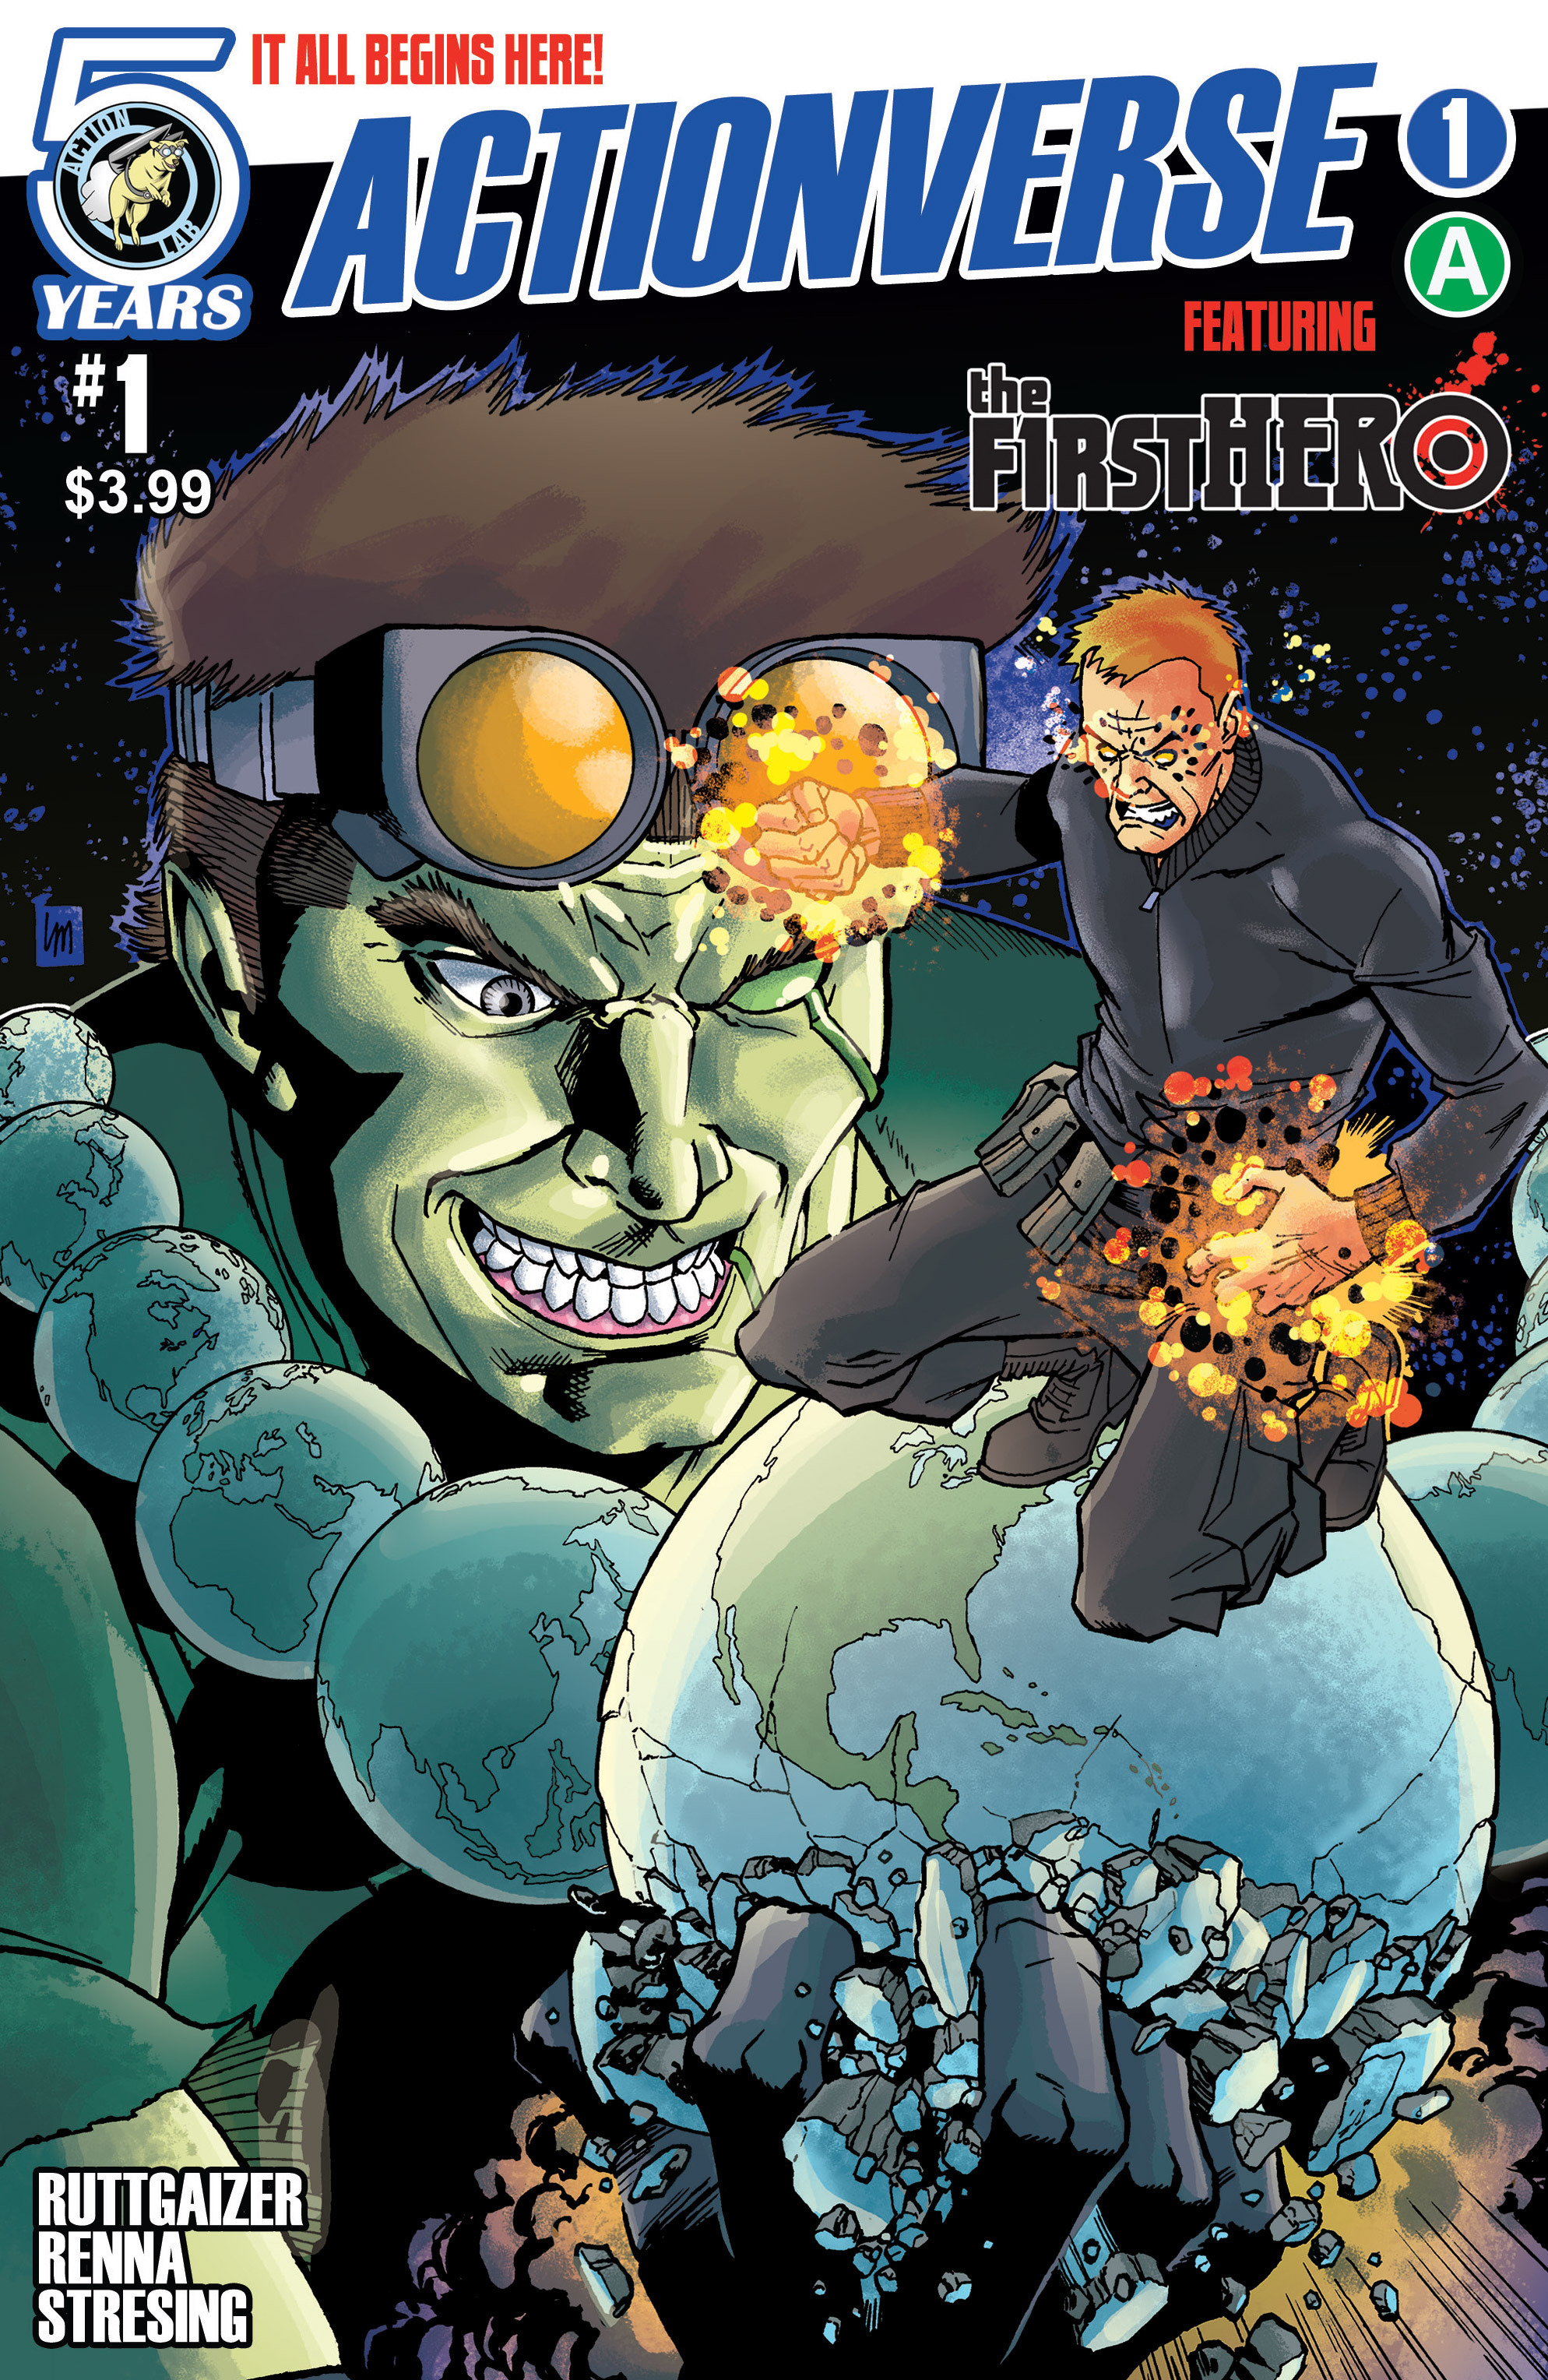 Read online Actionverse comic -  Issue #1 - 1